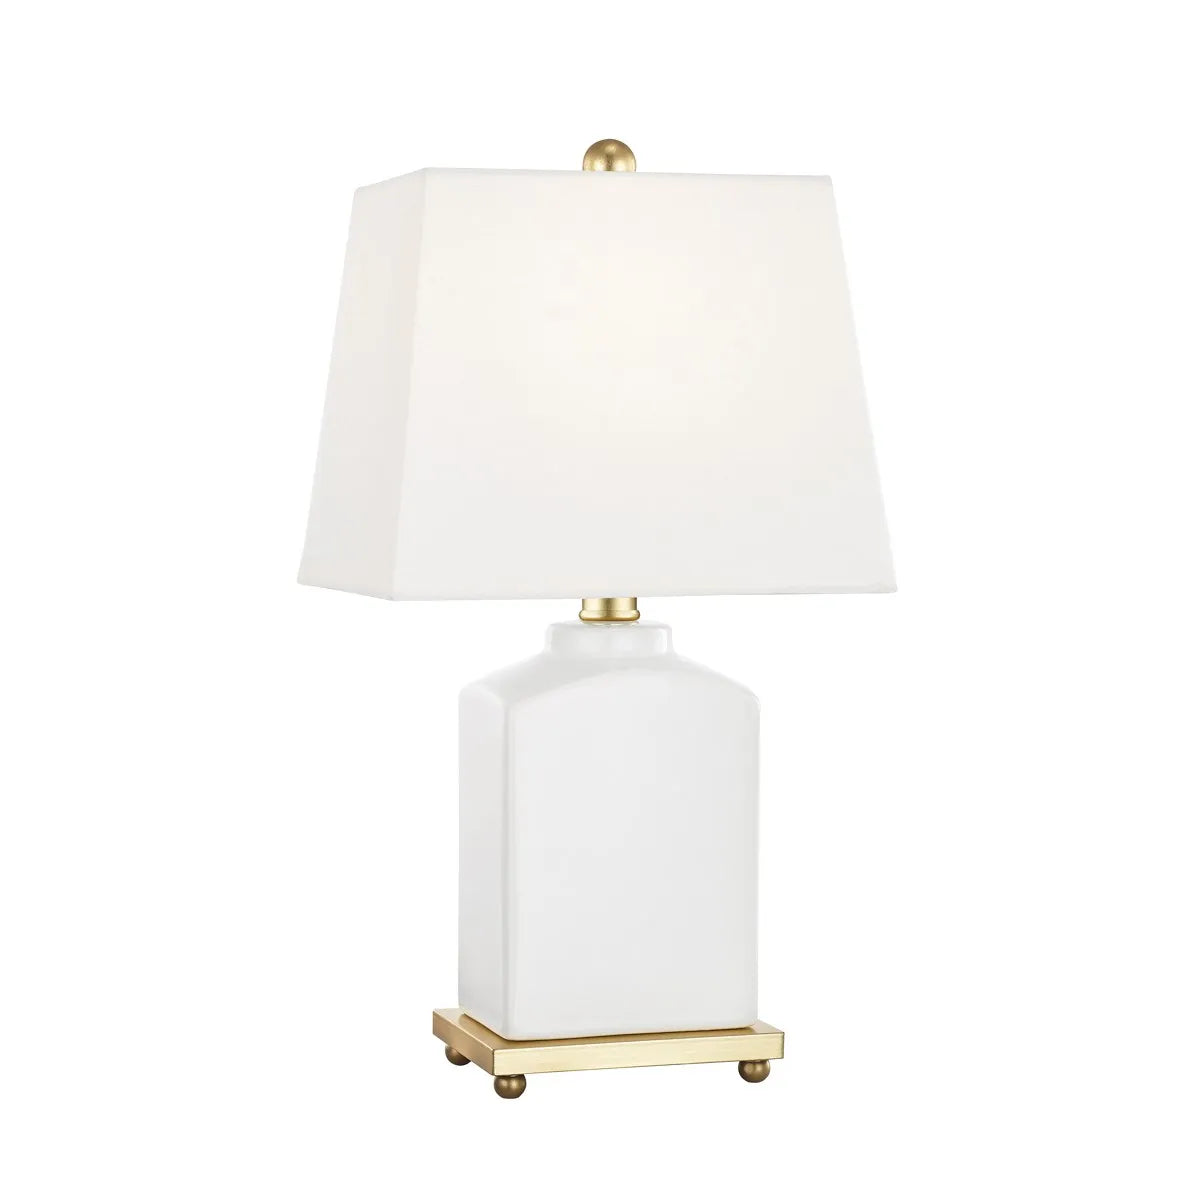 Brynn Jade Porcelain Table Lamp by Kevin Francis Design | Luxury Home Decor